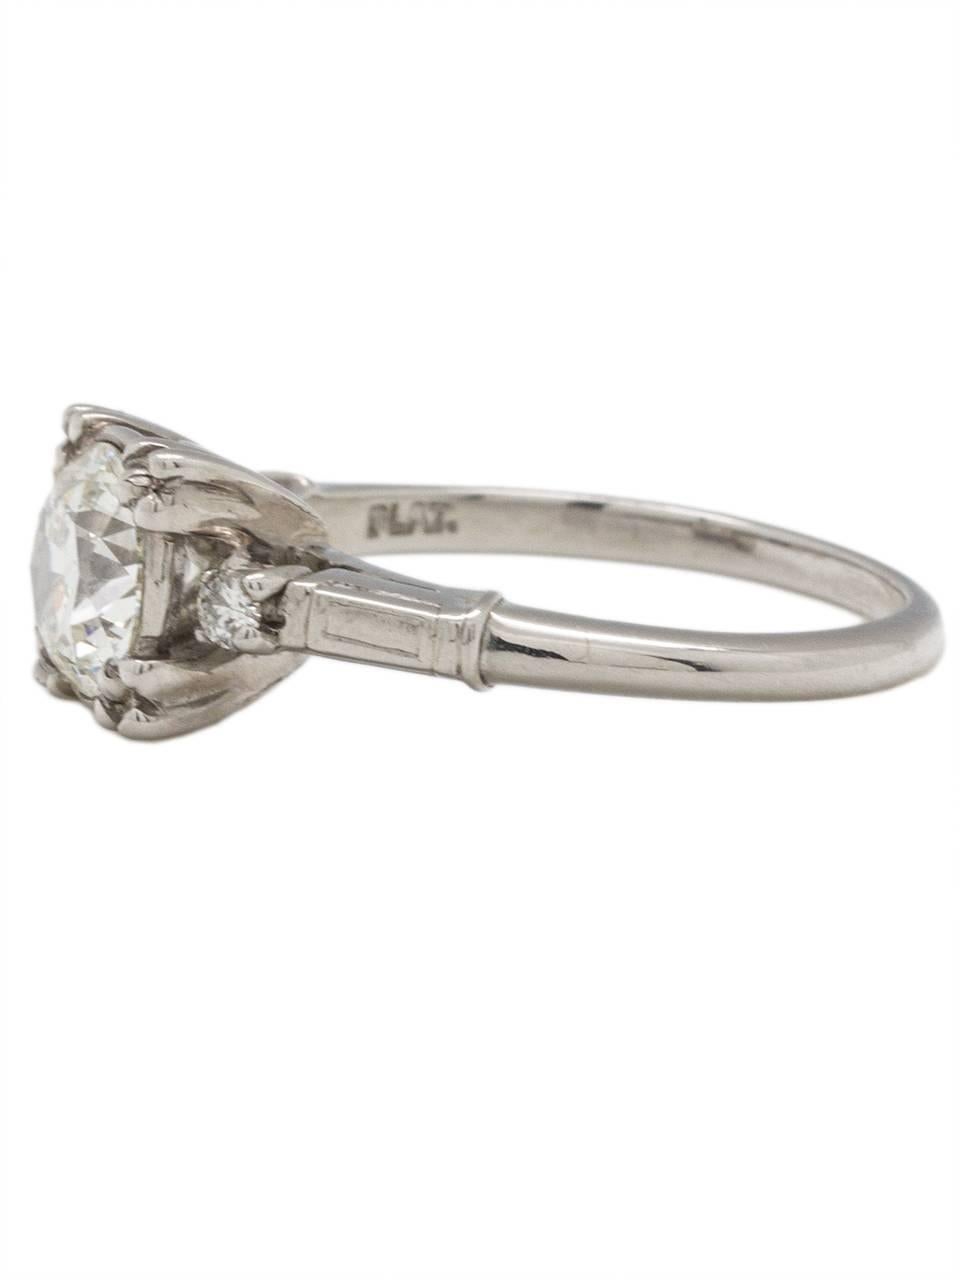 This impressive 1950s vintage platinum engagement ring features a stunningly bright 1.17 carat transitional round brilliant cut center diamond, I-VS2. Two petite round prong set side stones are the perfect accent to the center's brilliance. With an